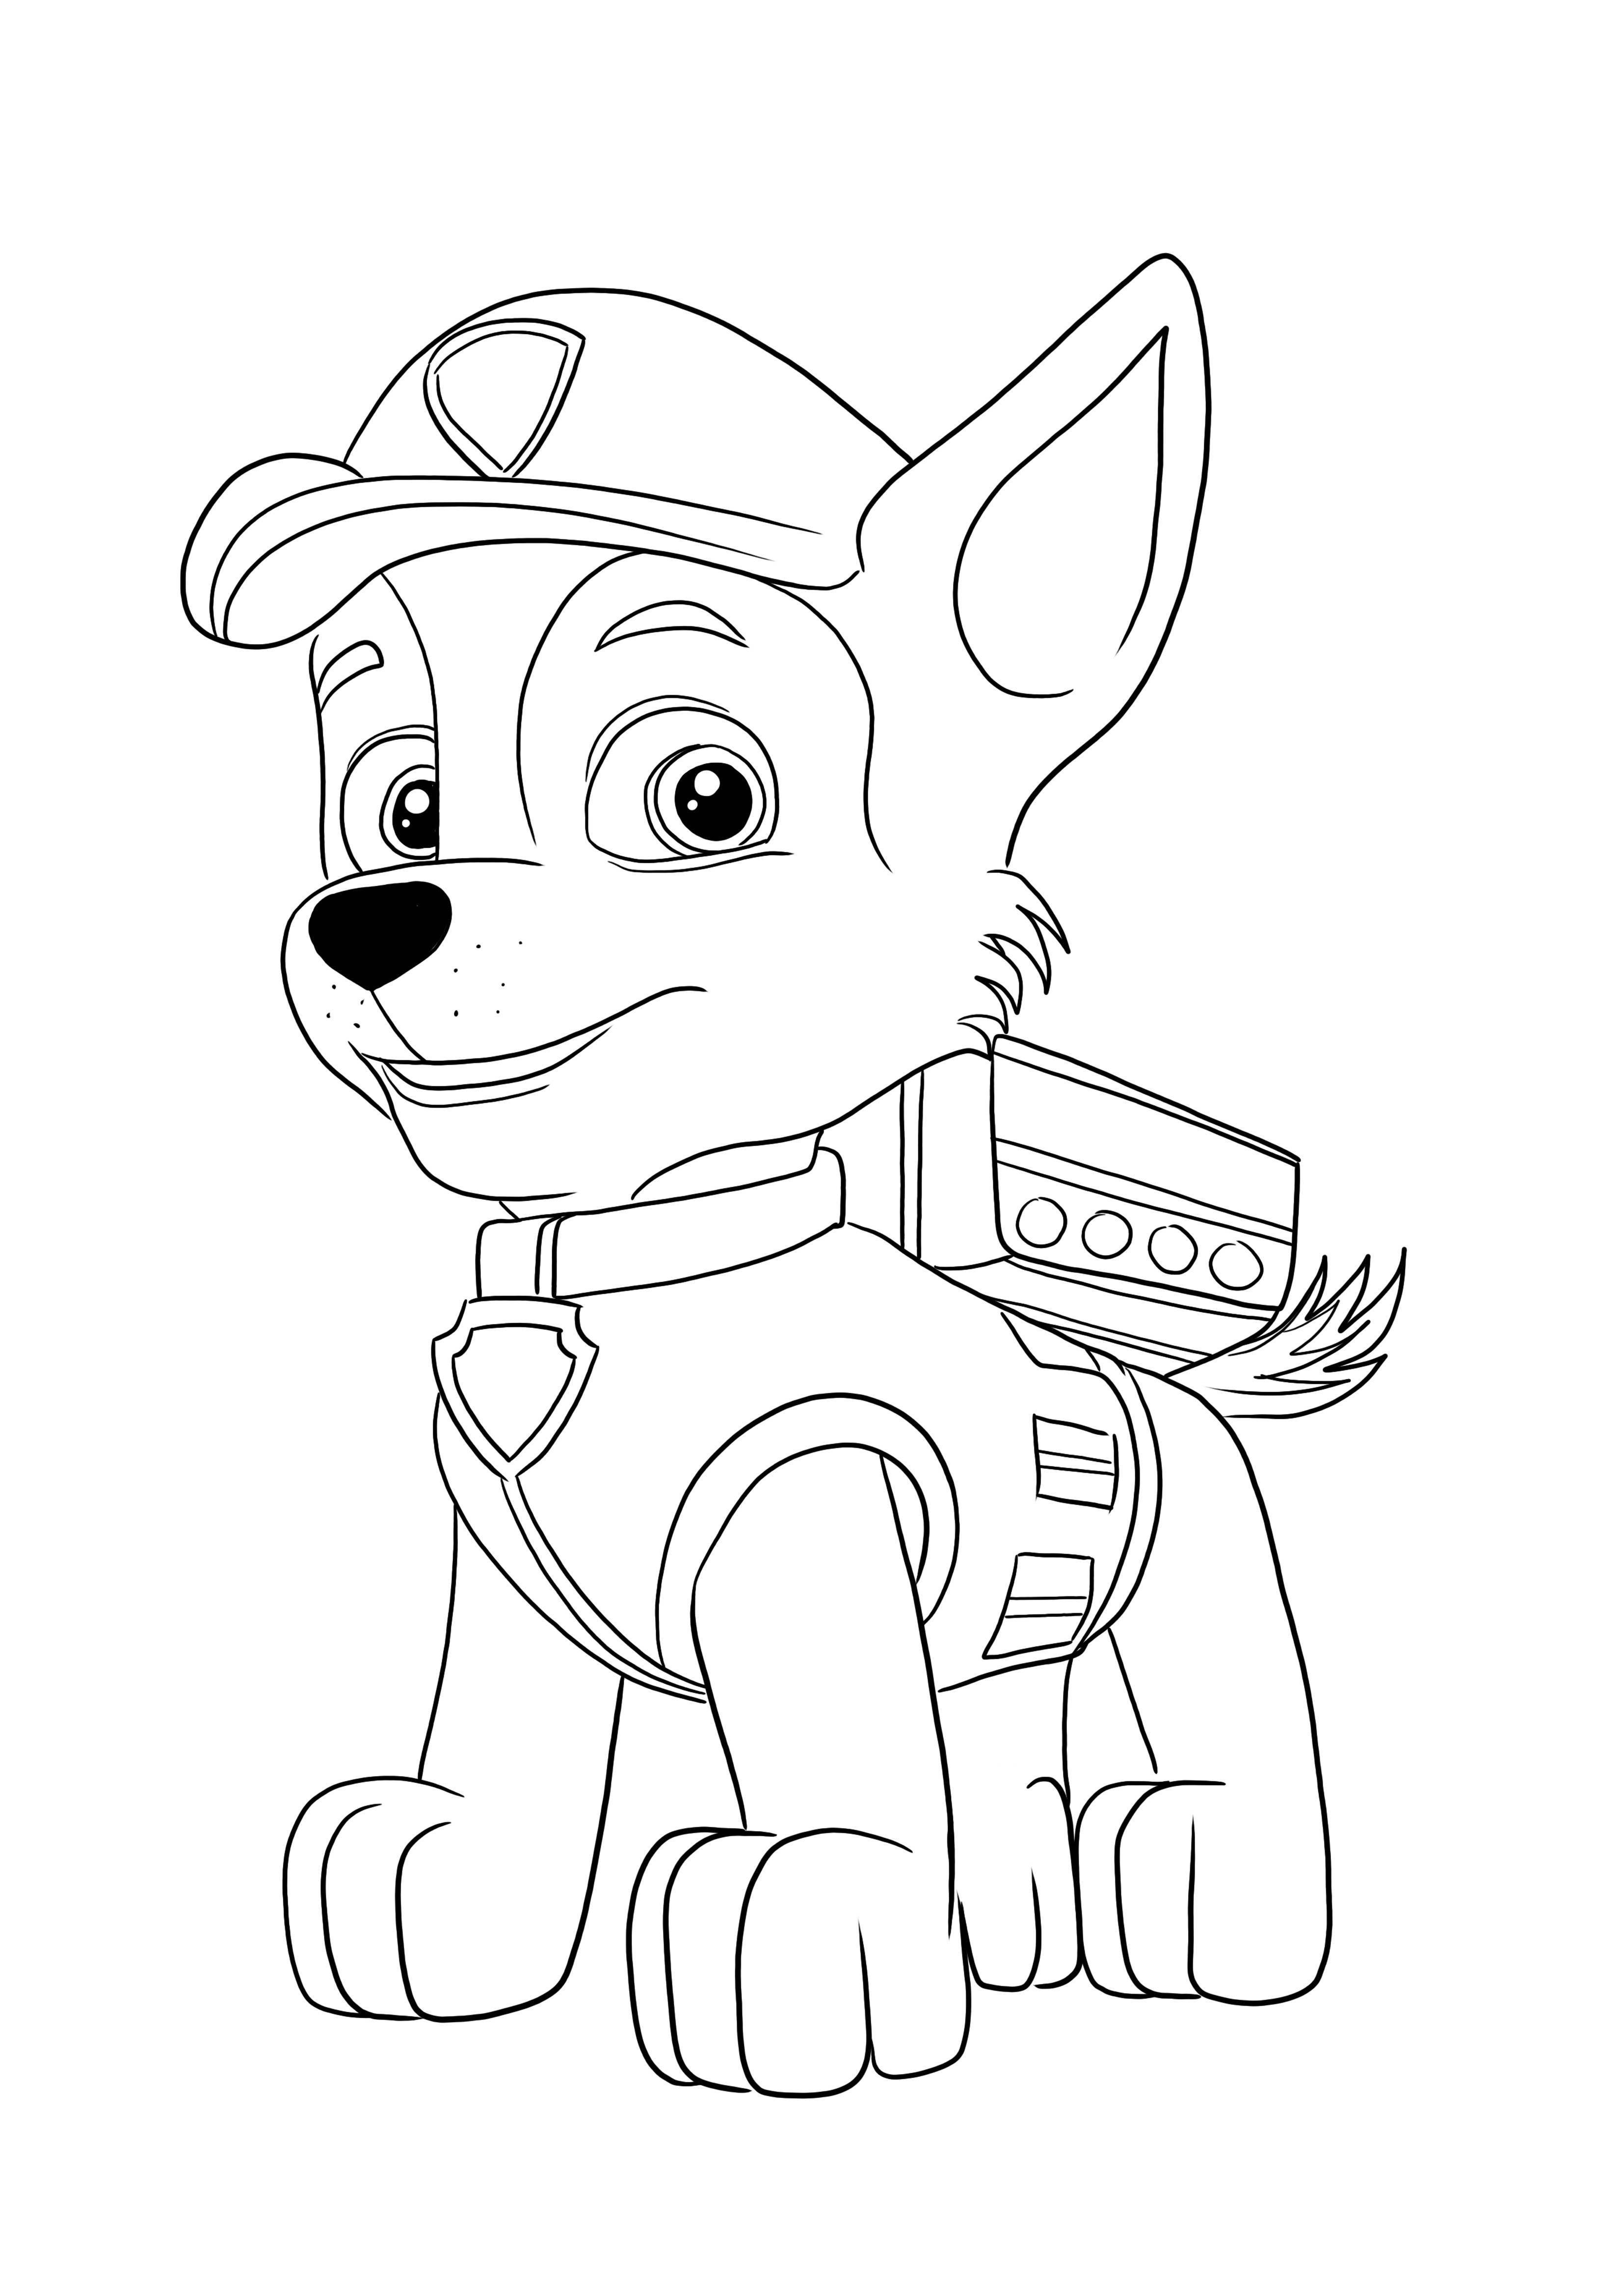 Rocky-the handy recycler ready to be colored and printed for free